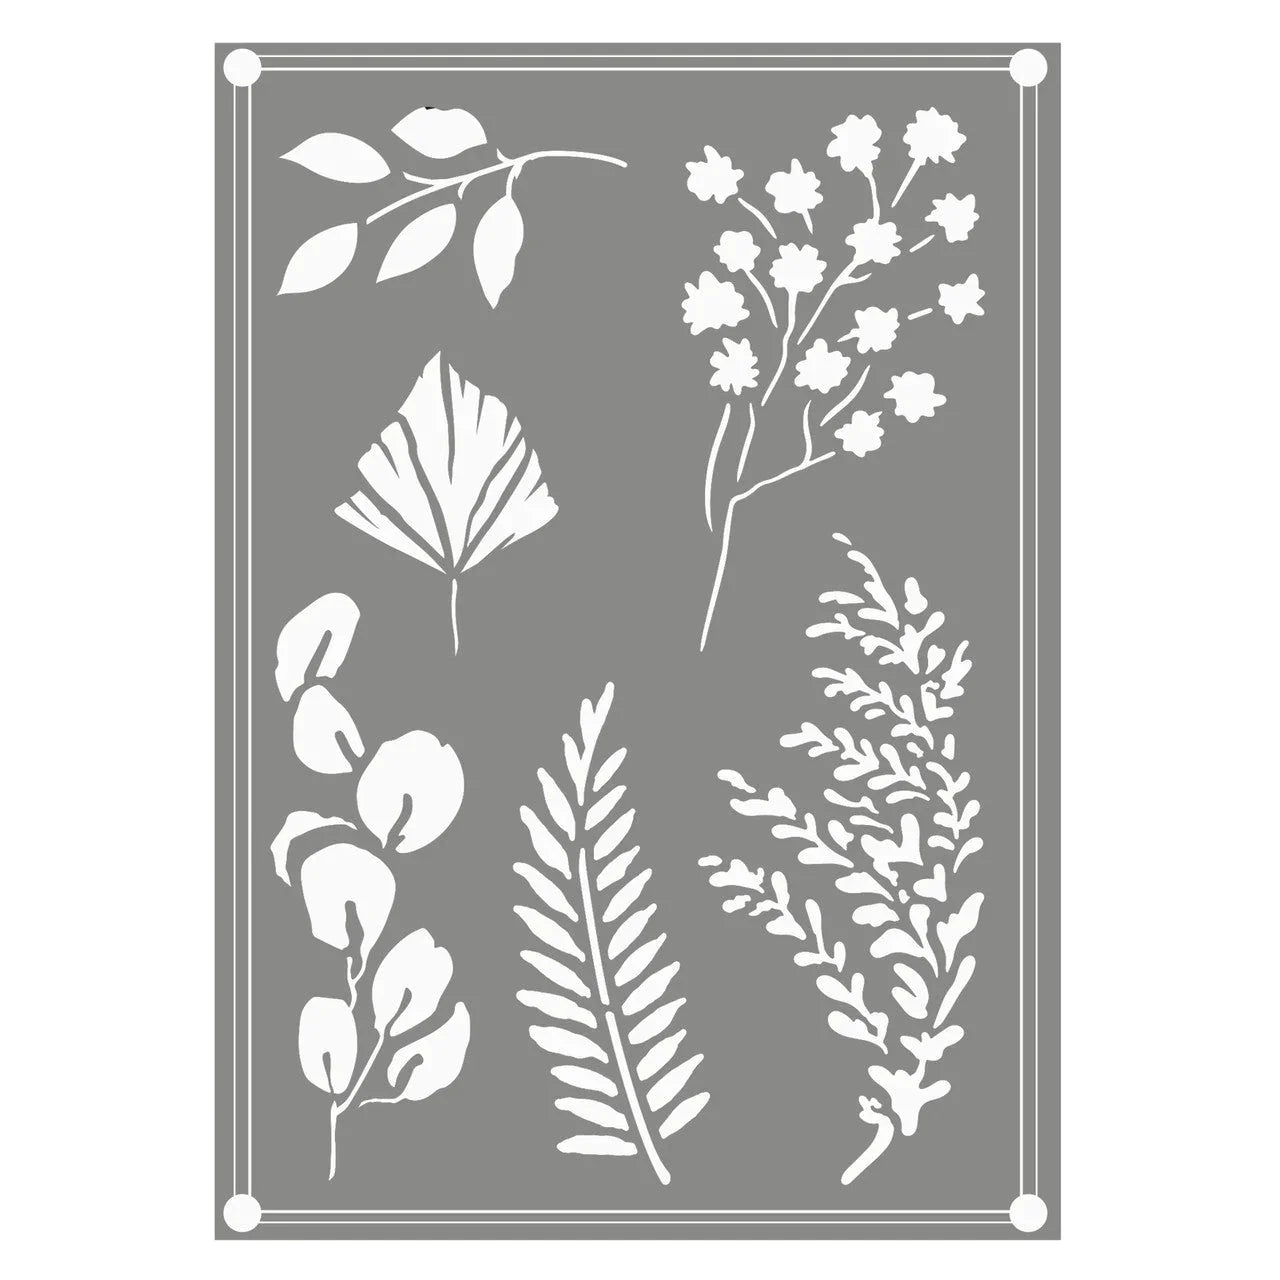 Couture Creations - Earthy Delights Mixed Leaves Stencil 2